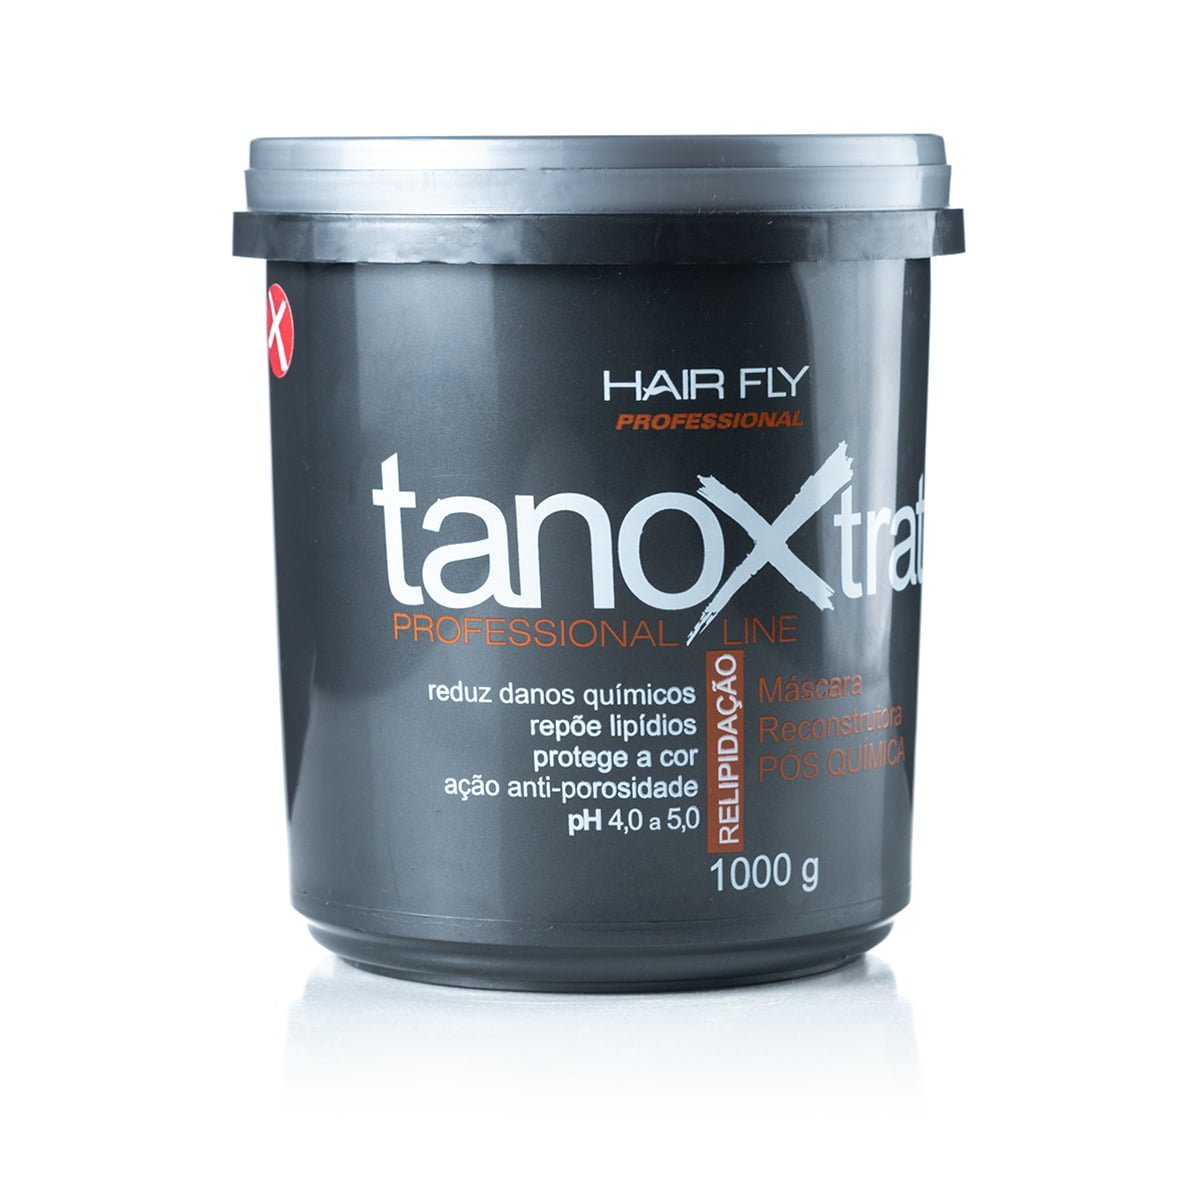 Hair Fly Hair treatment Hair Fly Tanox Trat Mask After Chemical 1000g